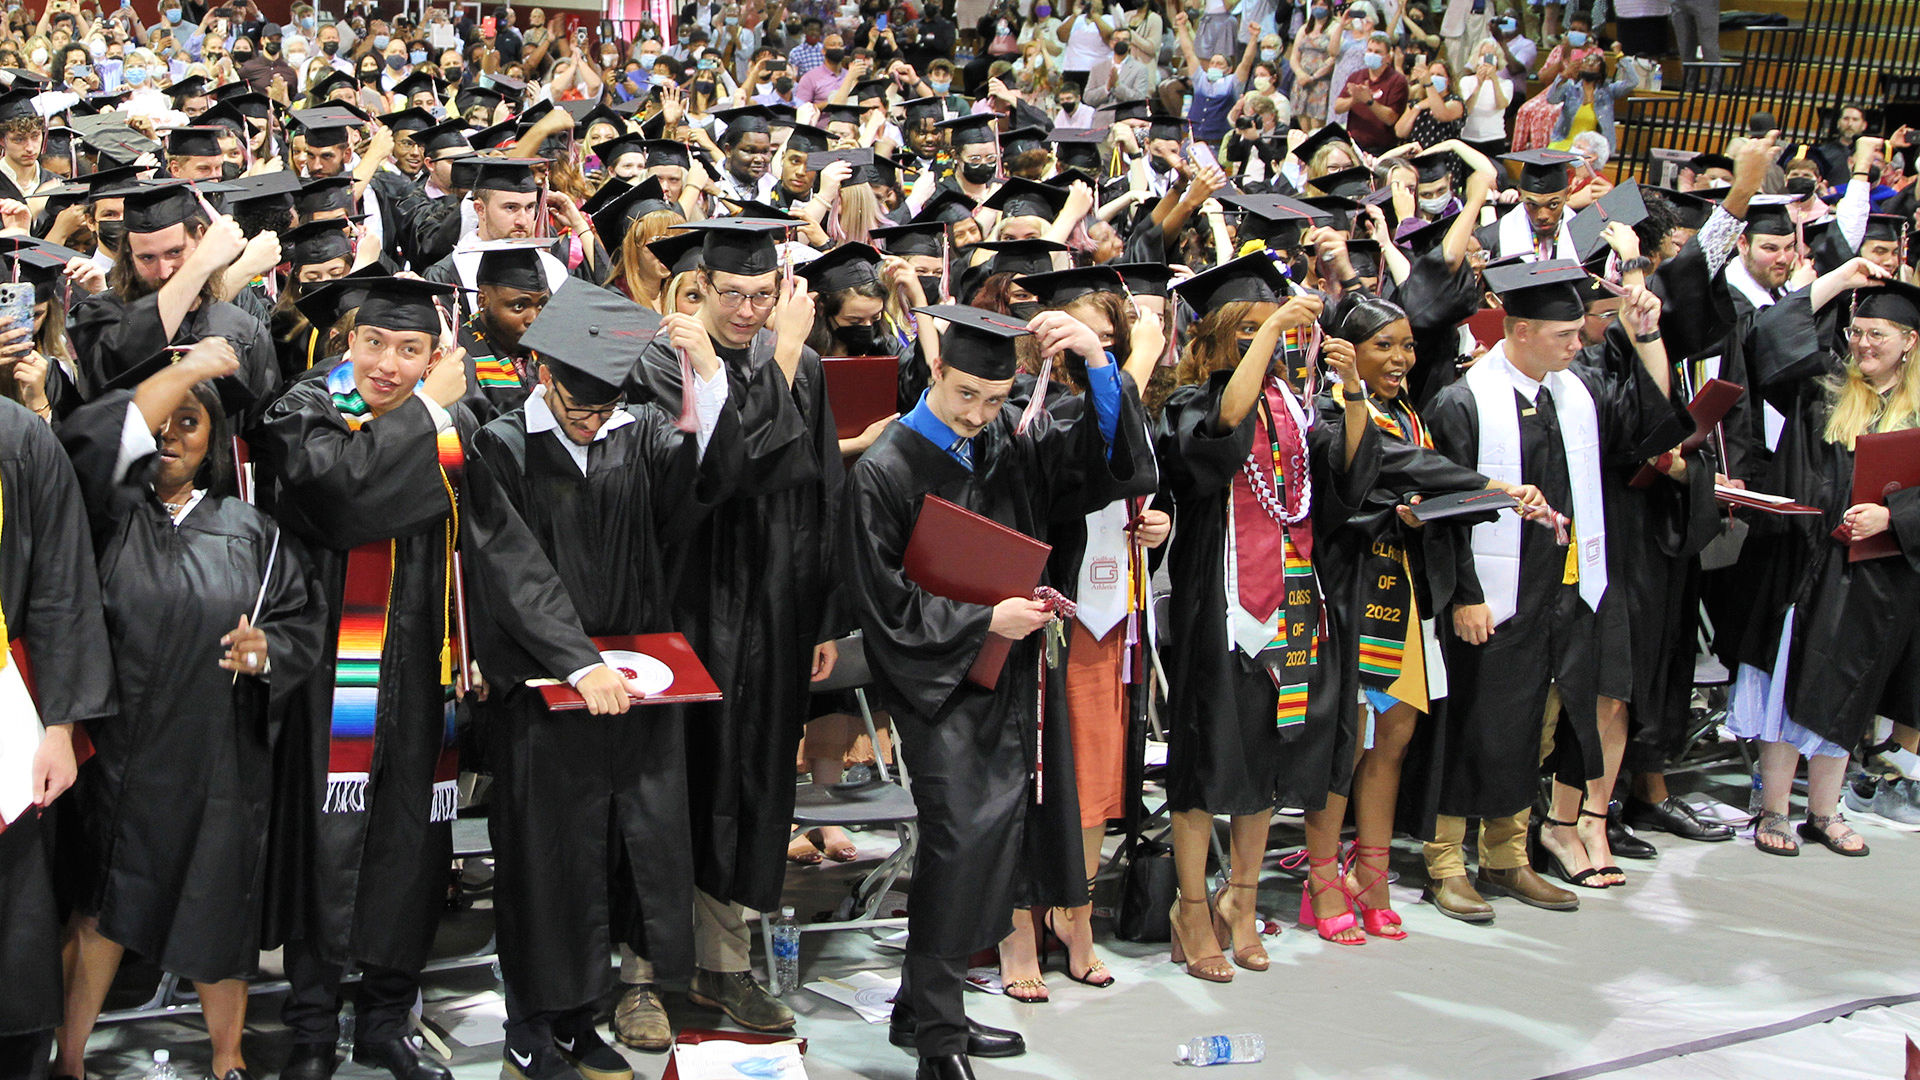 Students turn their tassels, all at once, to signify their graduation from Guilford College.